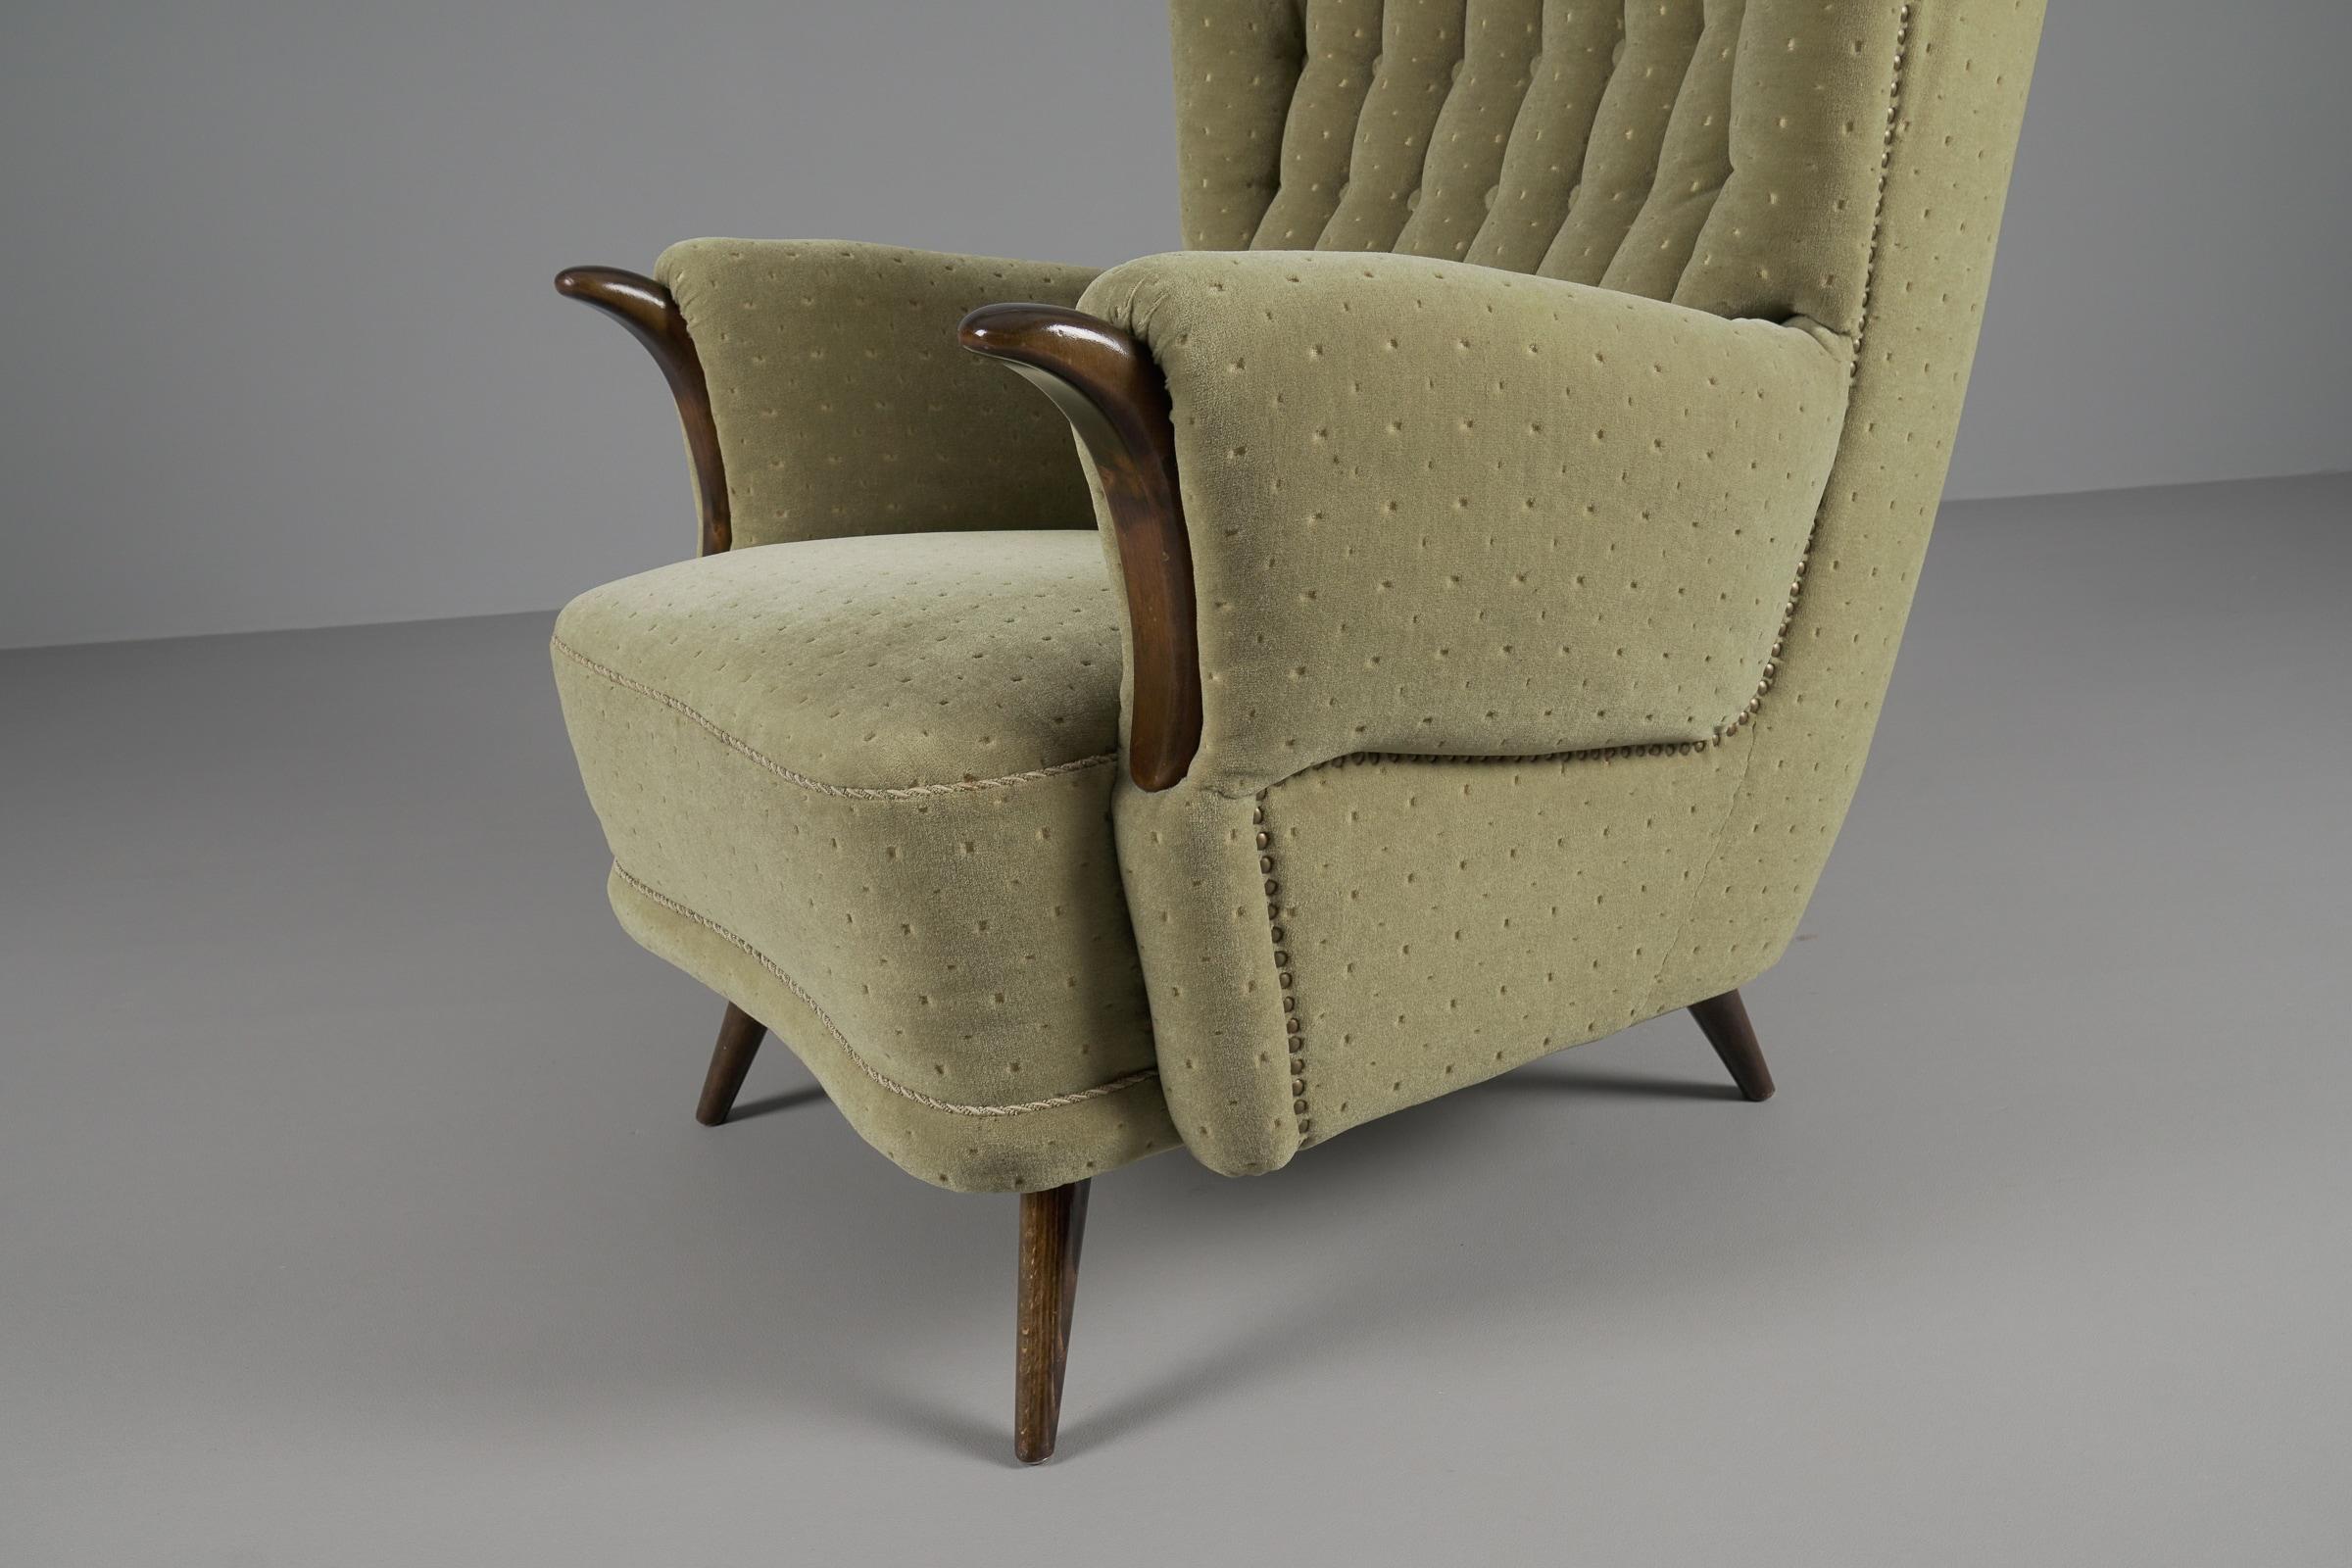 Large Green Italian Wood & Fabric Wingback Armchair, 1950s For Sale 4